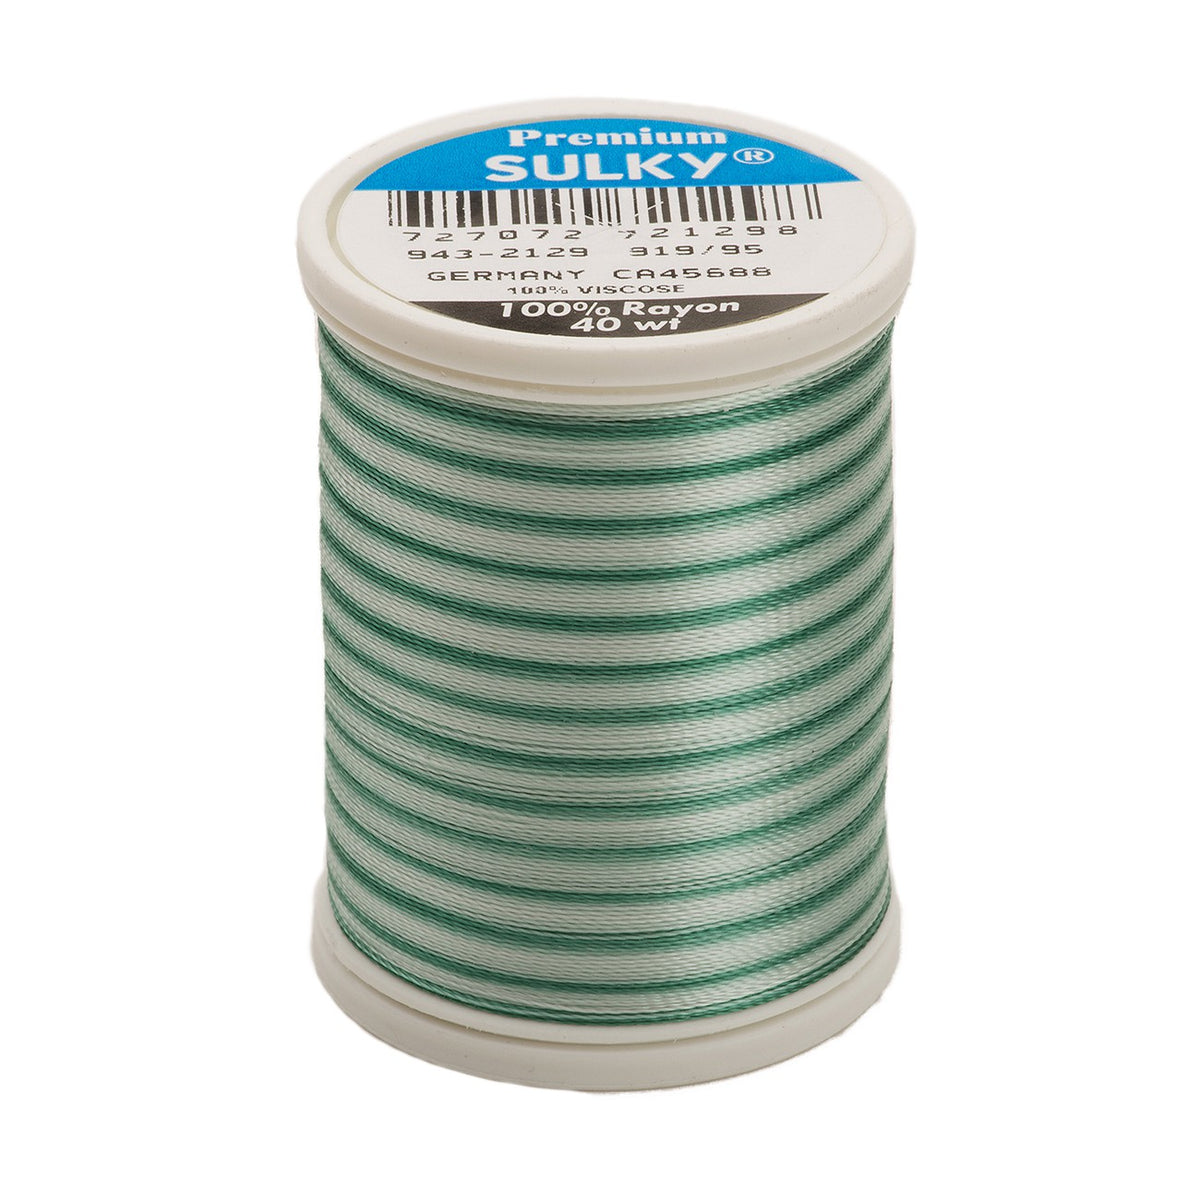 Sulky Variegated 40wt Rayon Thread 2129 French Greens  850yd